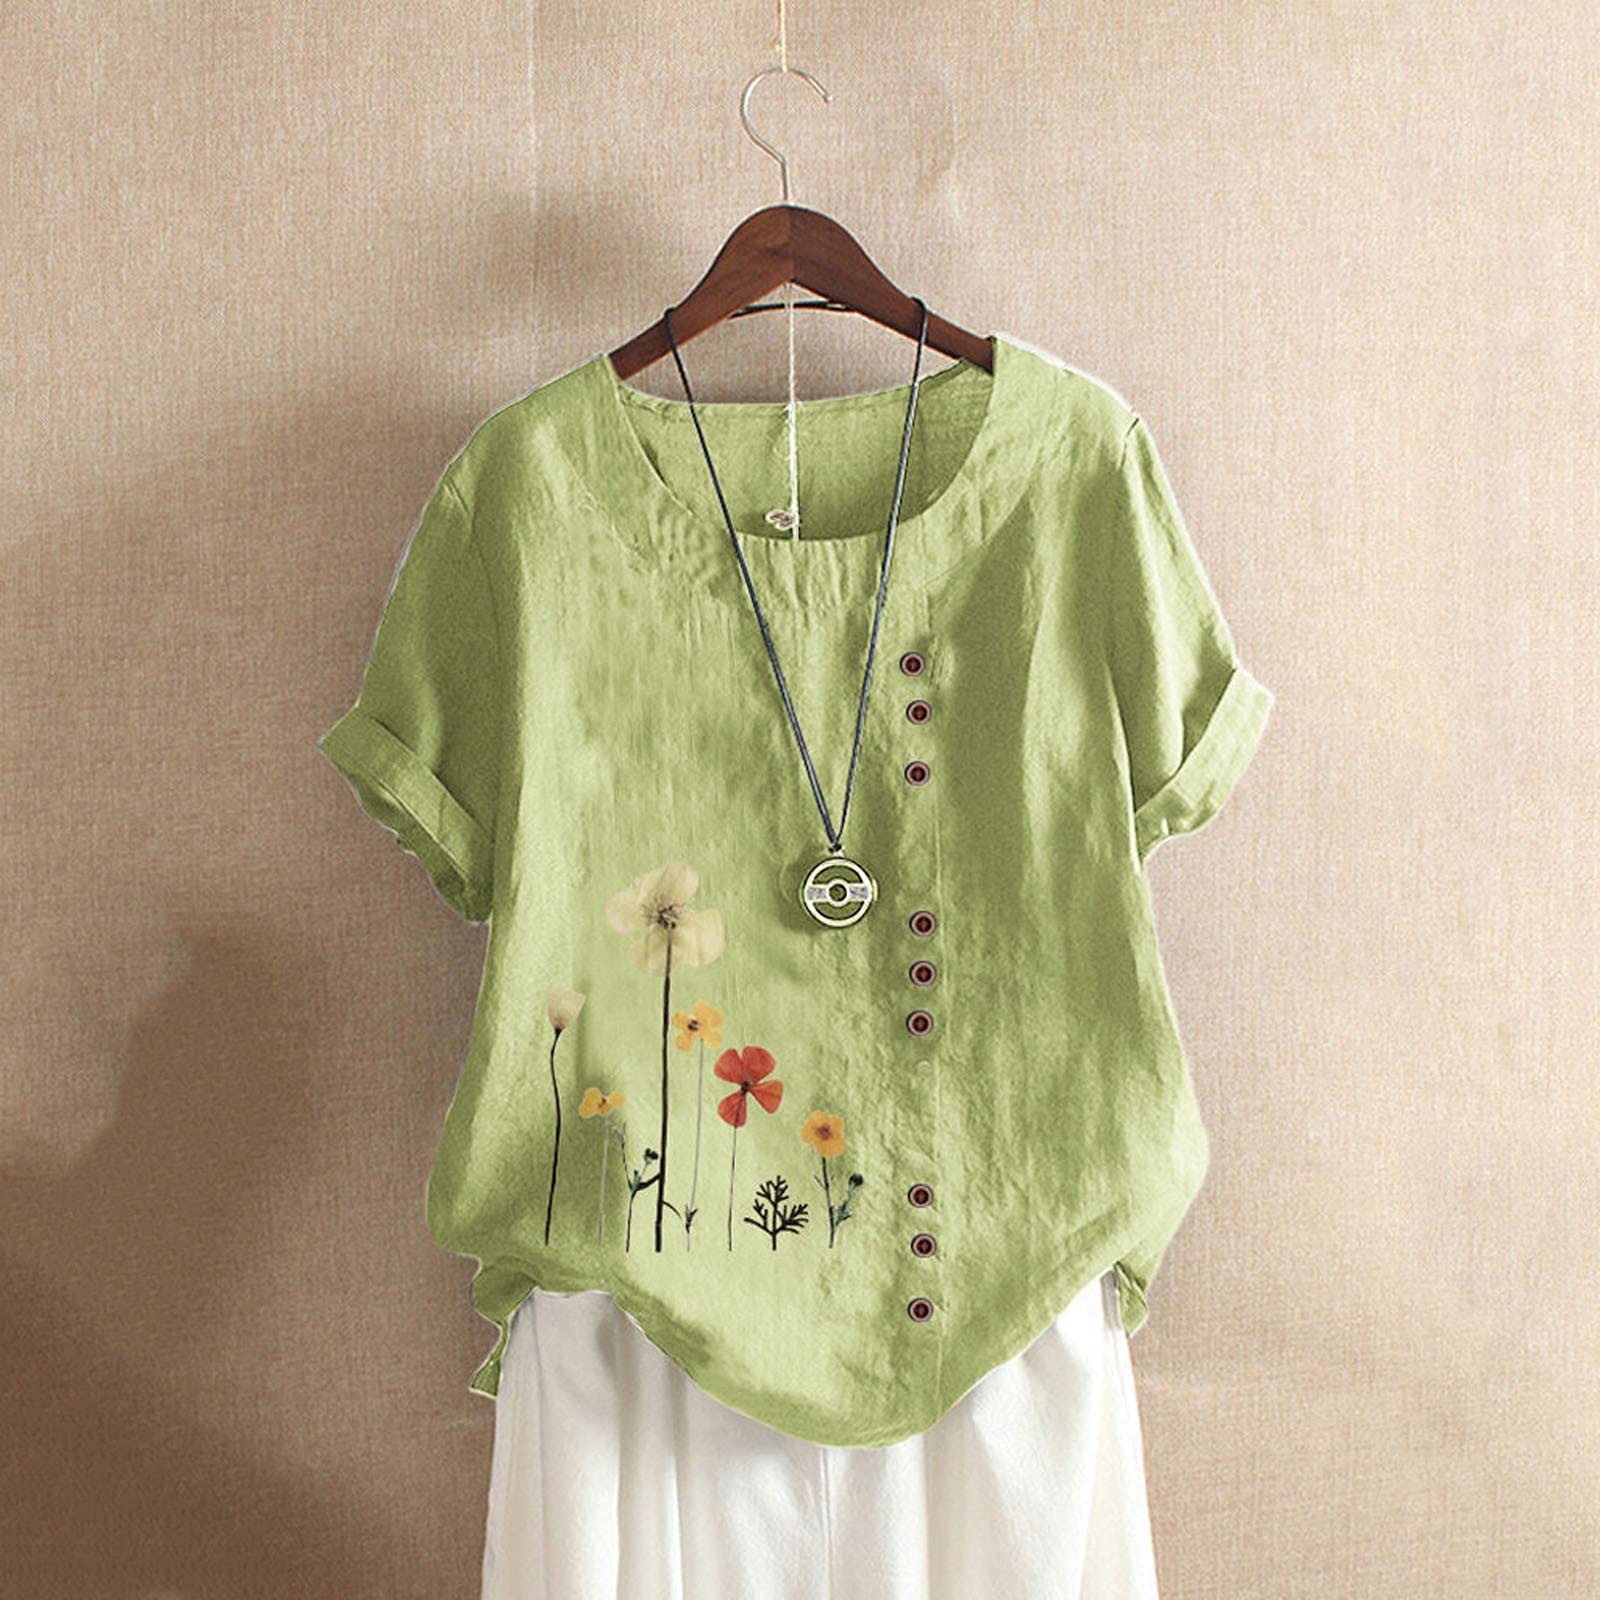 Bravetoshop Women's Short Sleeve Cotton Linen Floral Graphic Tee Tops Casual Summer T Shirts Comfy Plus Size Blouse (Green,L)